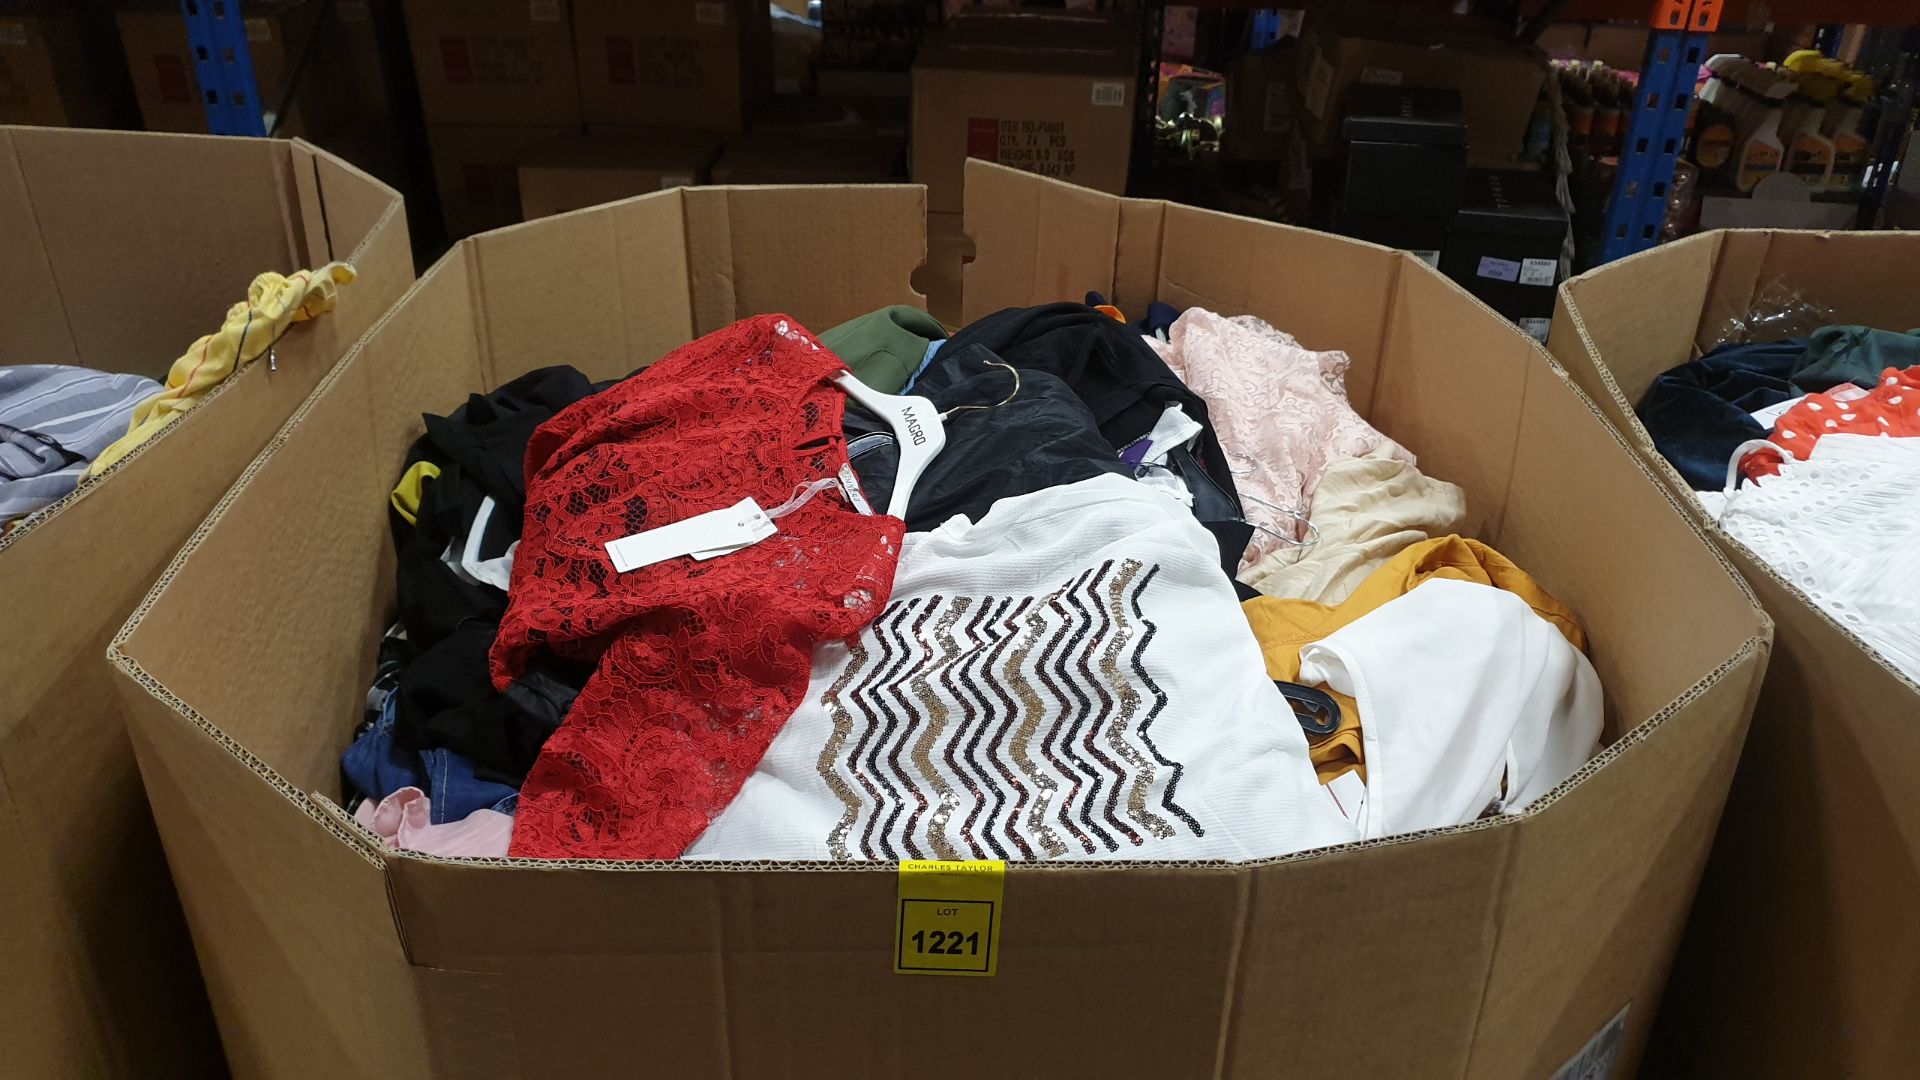 FULL PALLET OF CLOTHING IE MY POLO DENIM DRESSES, BIRGI PANTS, GDG ACTUEL DRESSES, MAGRO DRESSES AND